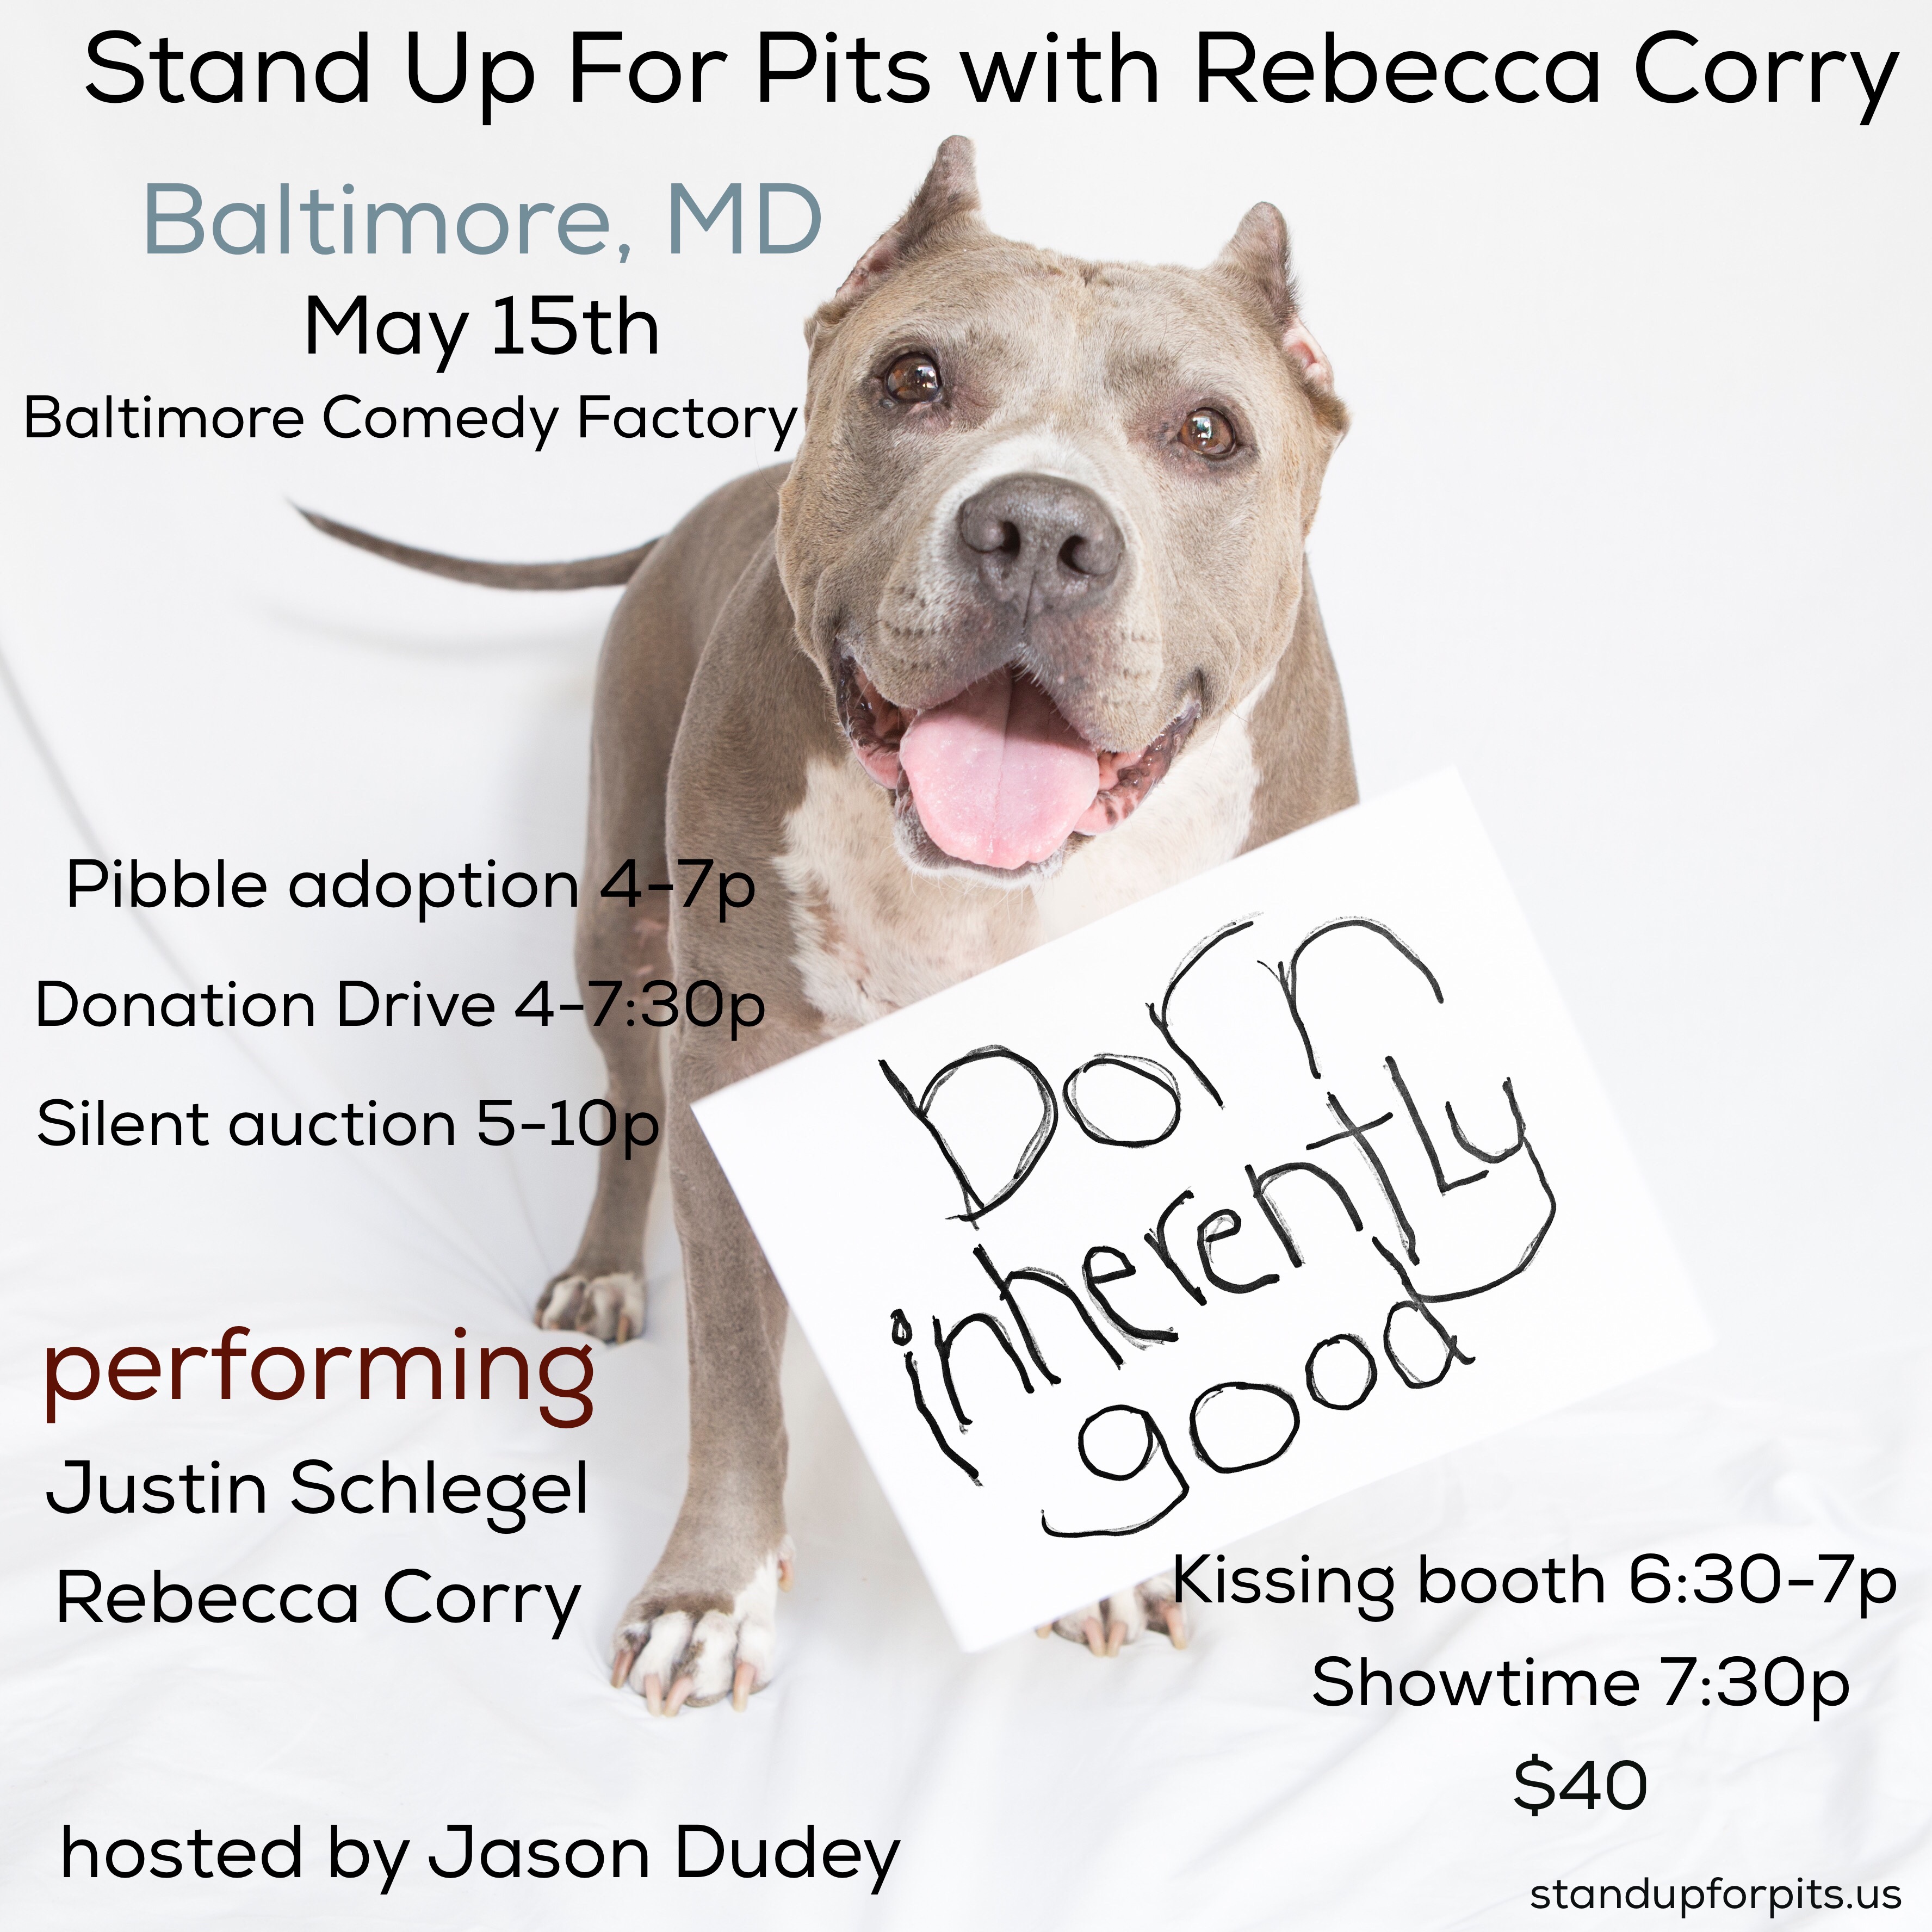 BALTIMORE’S first Stand Up For Pits happens May 15th!